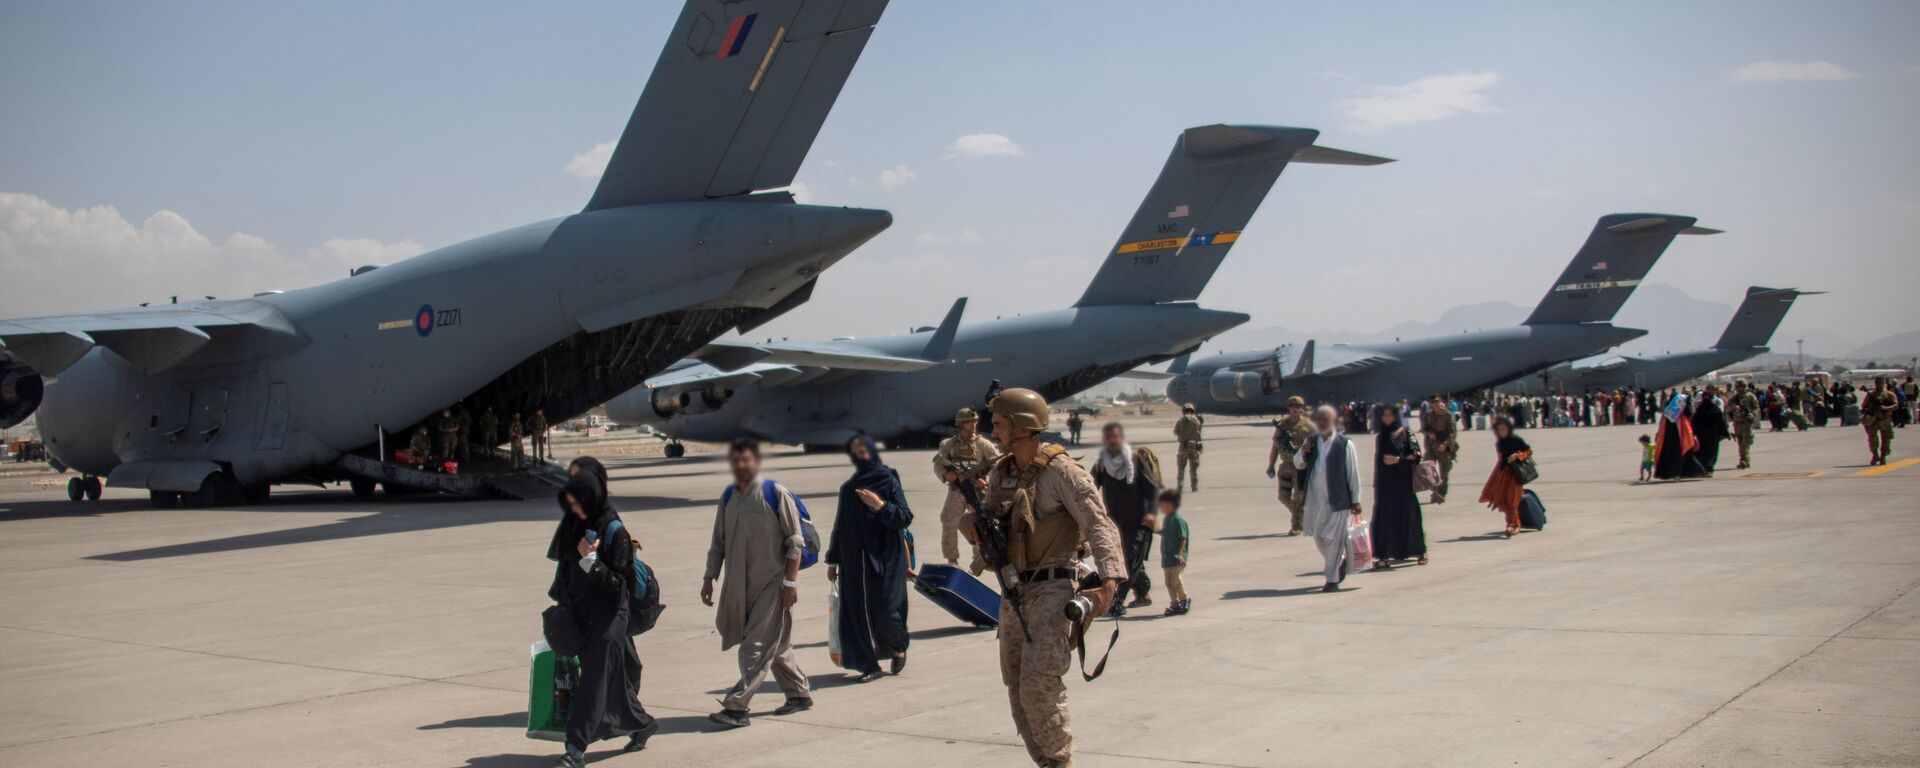 Members of the UK Armed Forces continue to take part in the evacuation of entitled personnel from Kabul airport, in Kabul, Afghanistan August 19-22, 2021, in this handout picture obtained by Reuters on August 23, 2021. LPhot Ben Shread/UK MOD Crown copyright 2021/Handout via REUTERS  THIS IMAGE HAS BEEN SUPPLIED BY A THIRD PARTY. MANDATORY CREDIT. NO RESALES. NO ARCHIVES. - Sputnik International, 1920, 26.12.2021